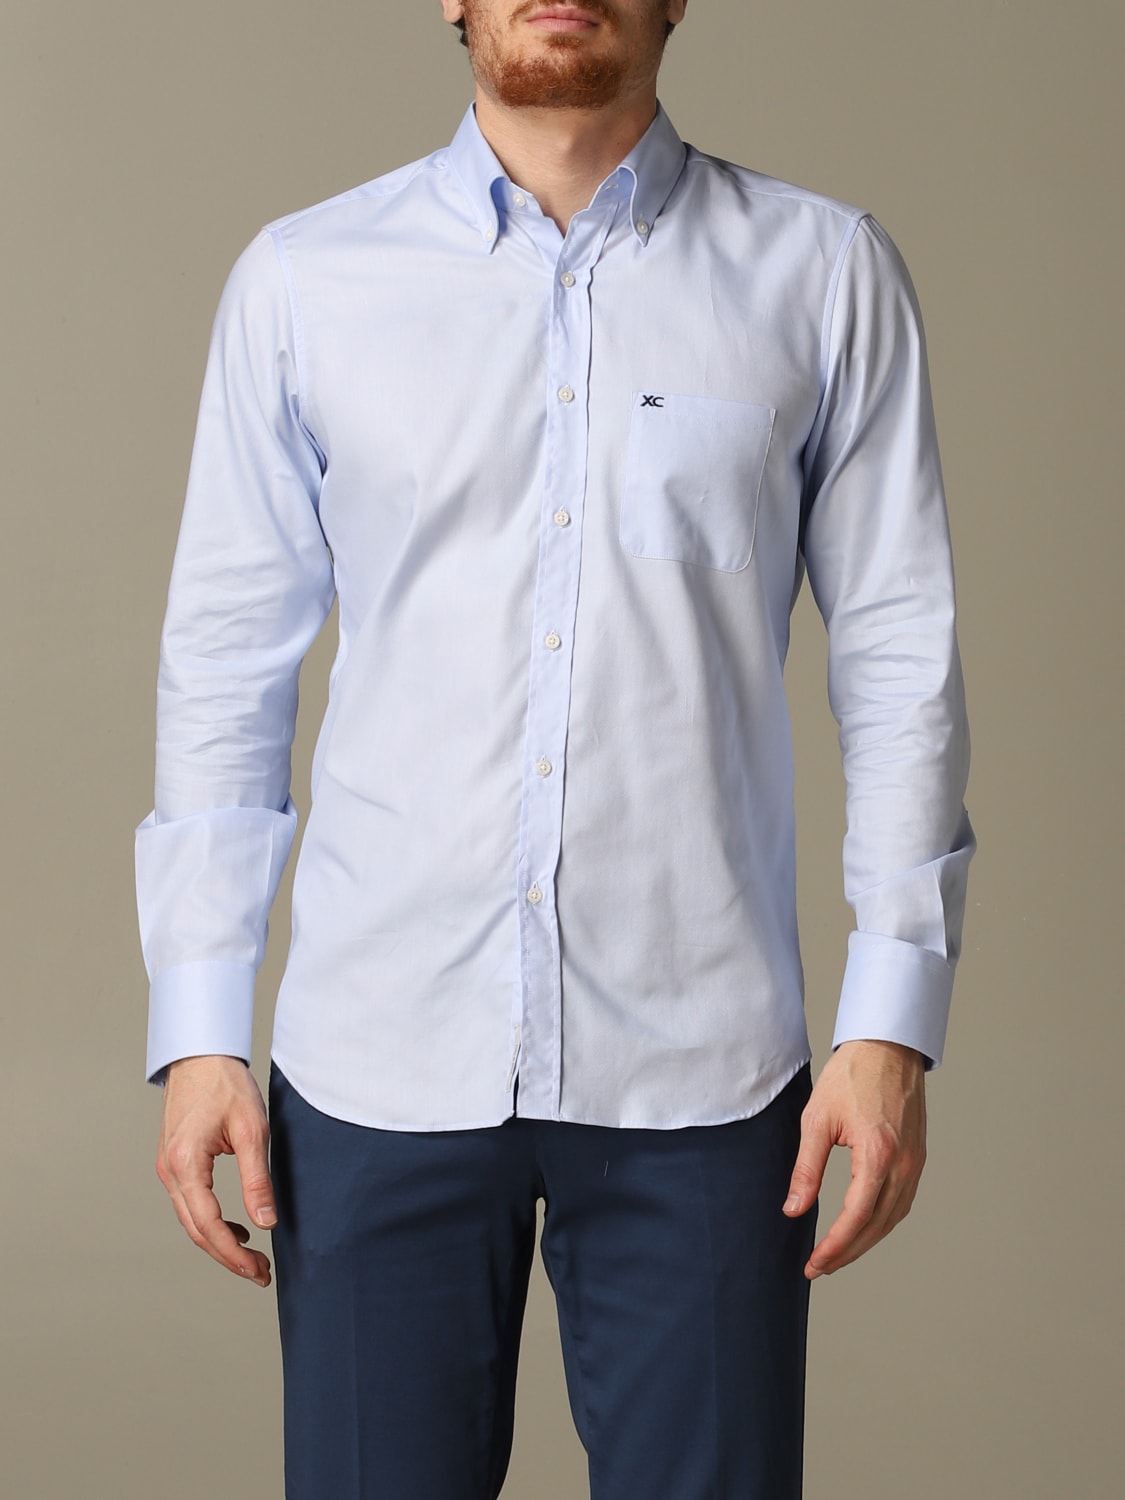 Xc -  slim fit shirt with button down collar